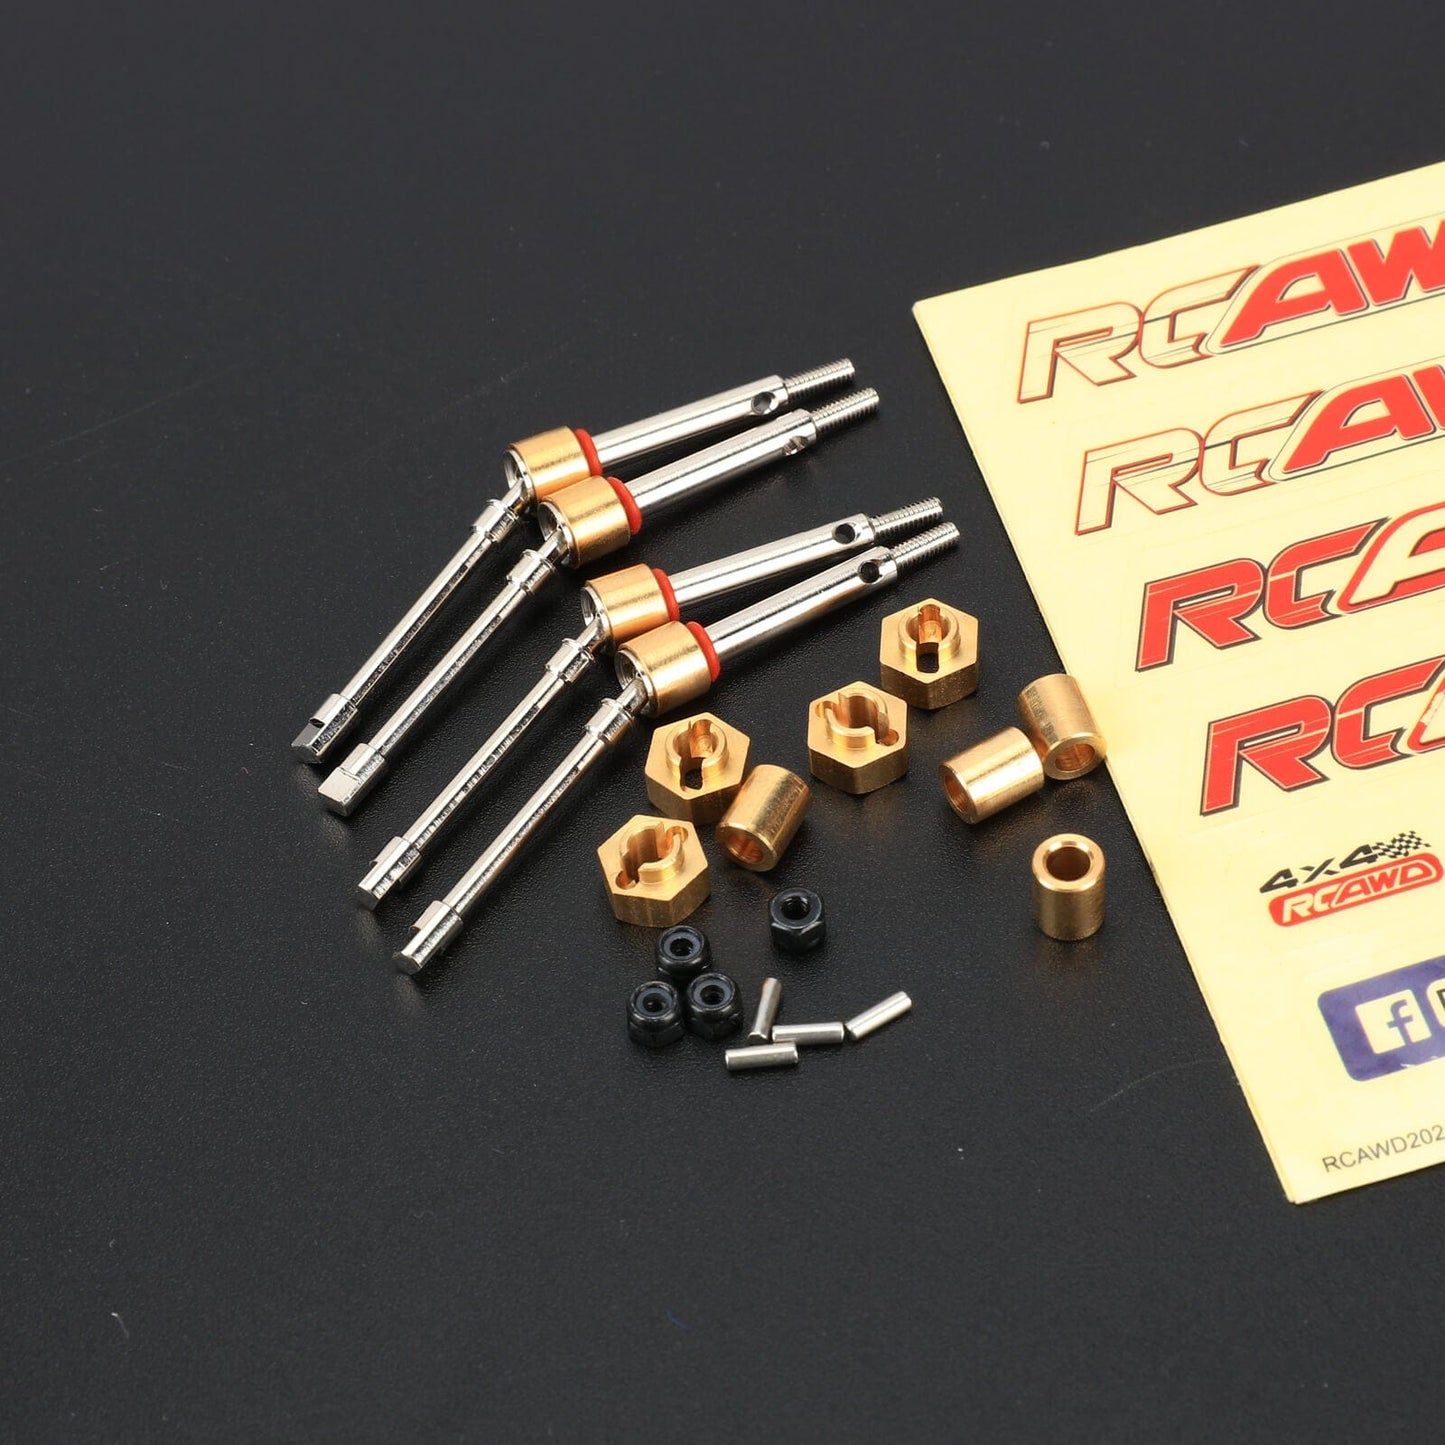 RCAWD AXIAL SCX24 +4mm RCAWD Axial SCX24 Upgrades Extended 4mm Front CVD Driveshaft Compatiable with AX24